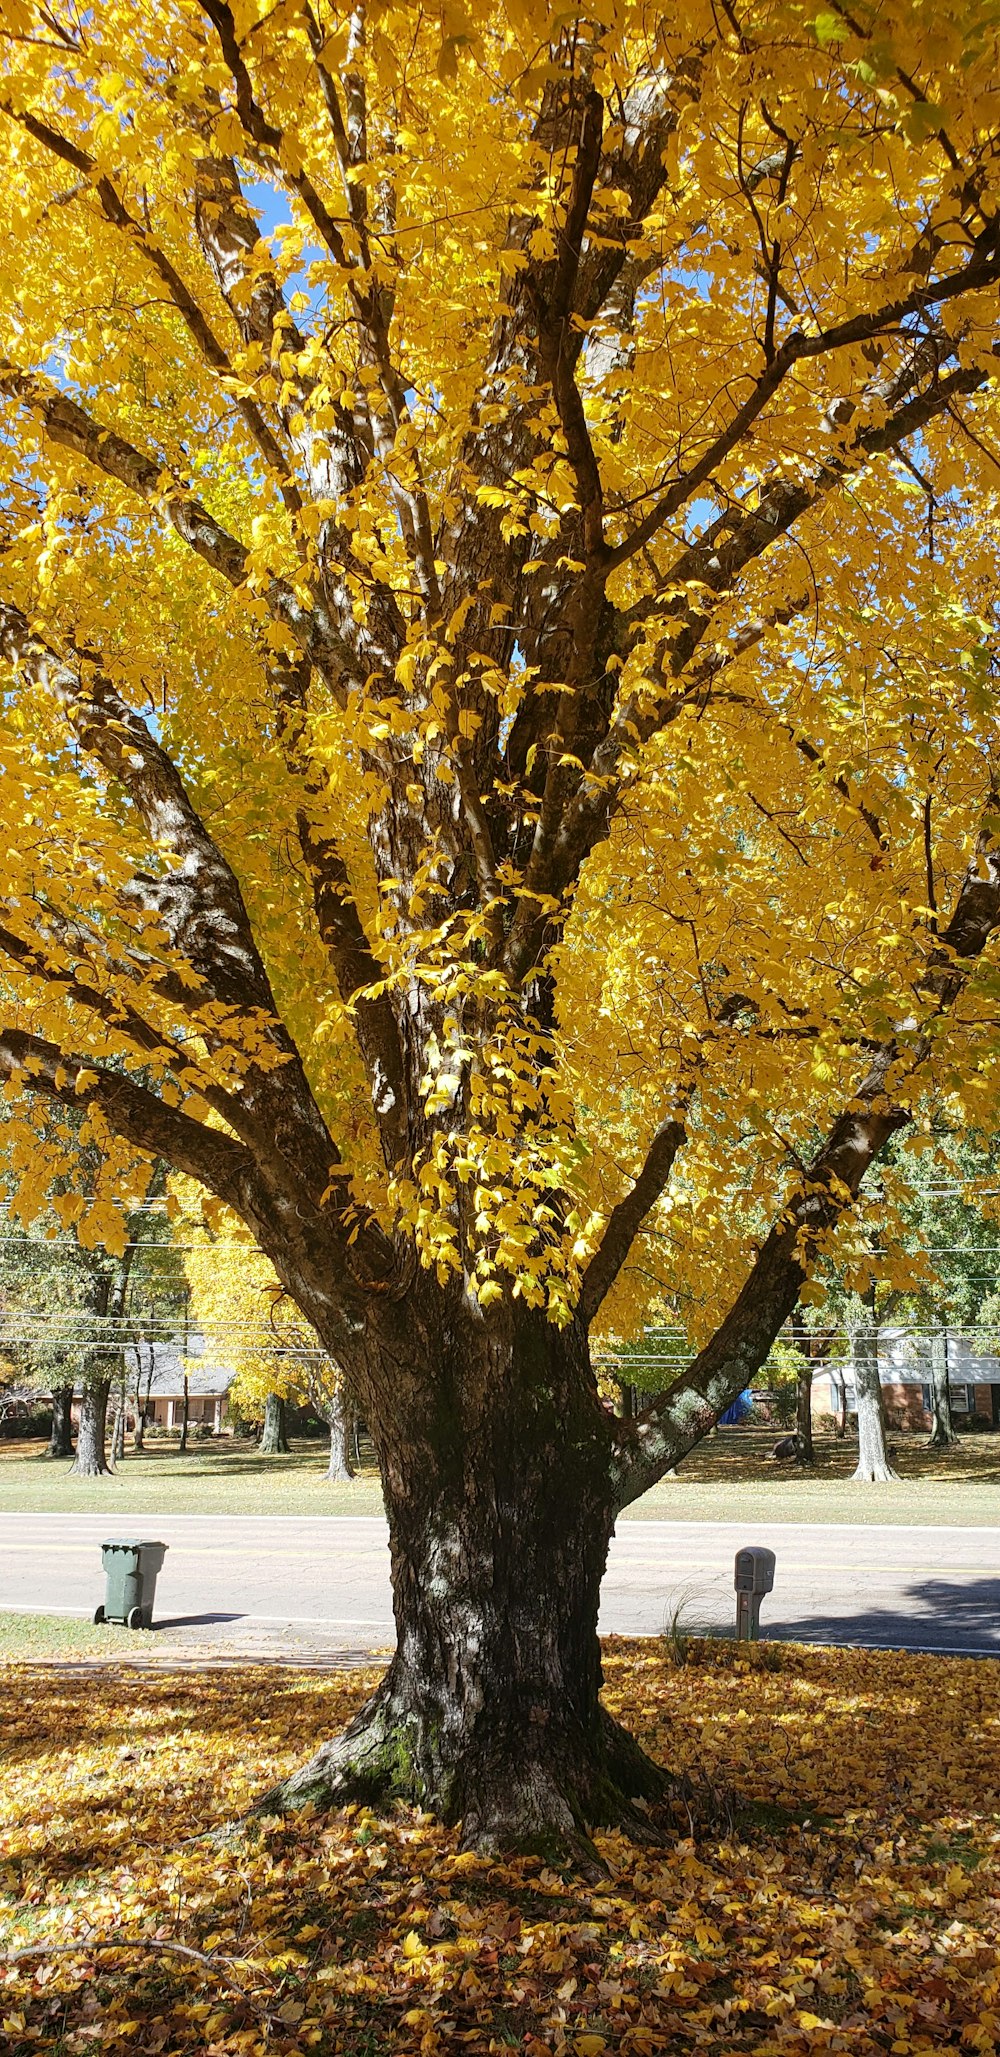 yellow leaf tree near road during daytime